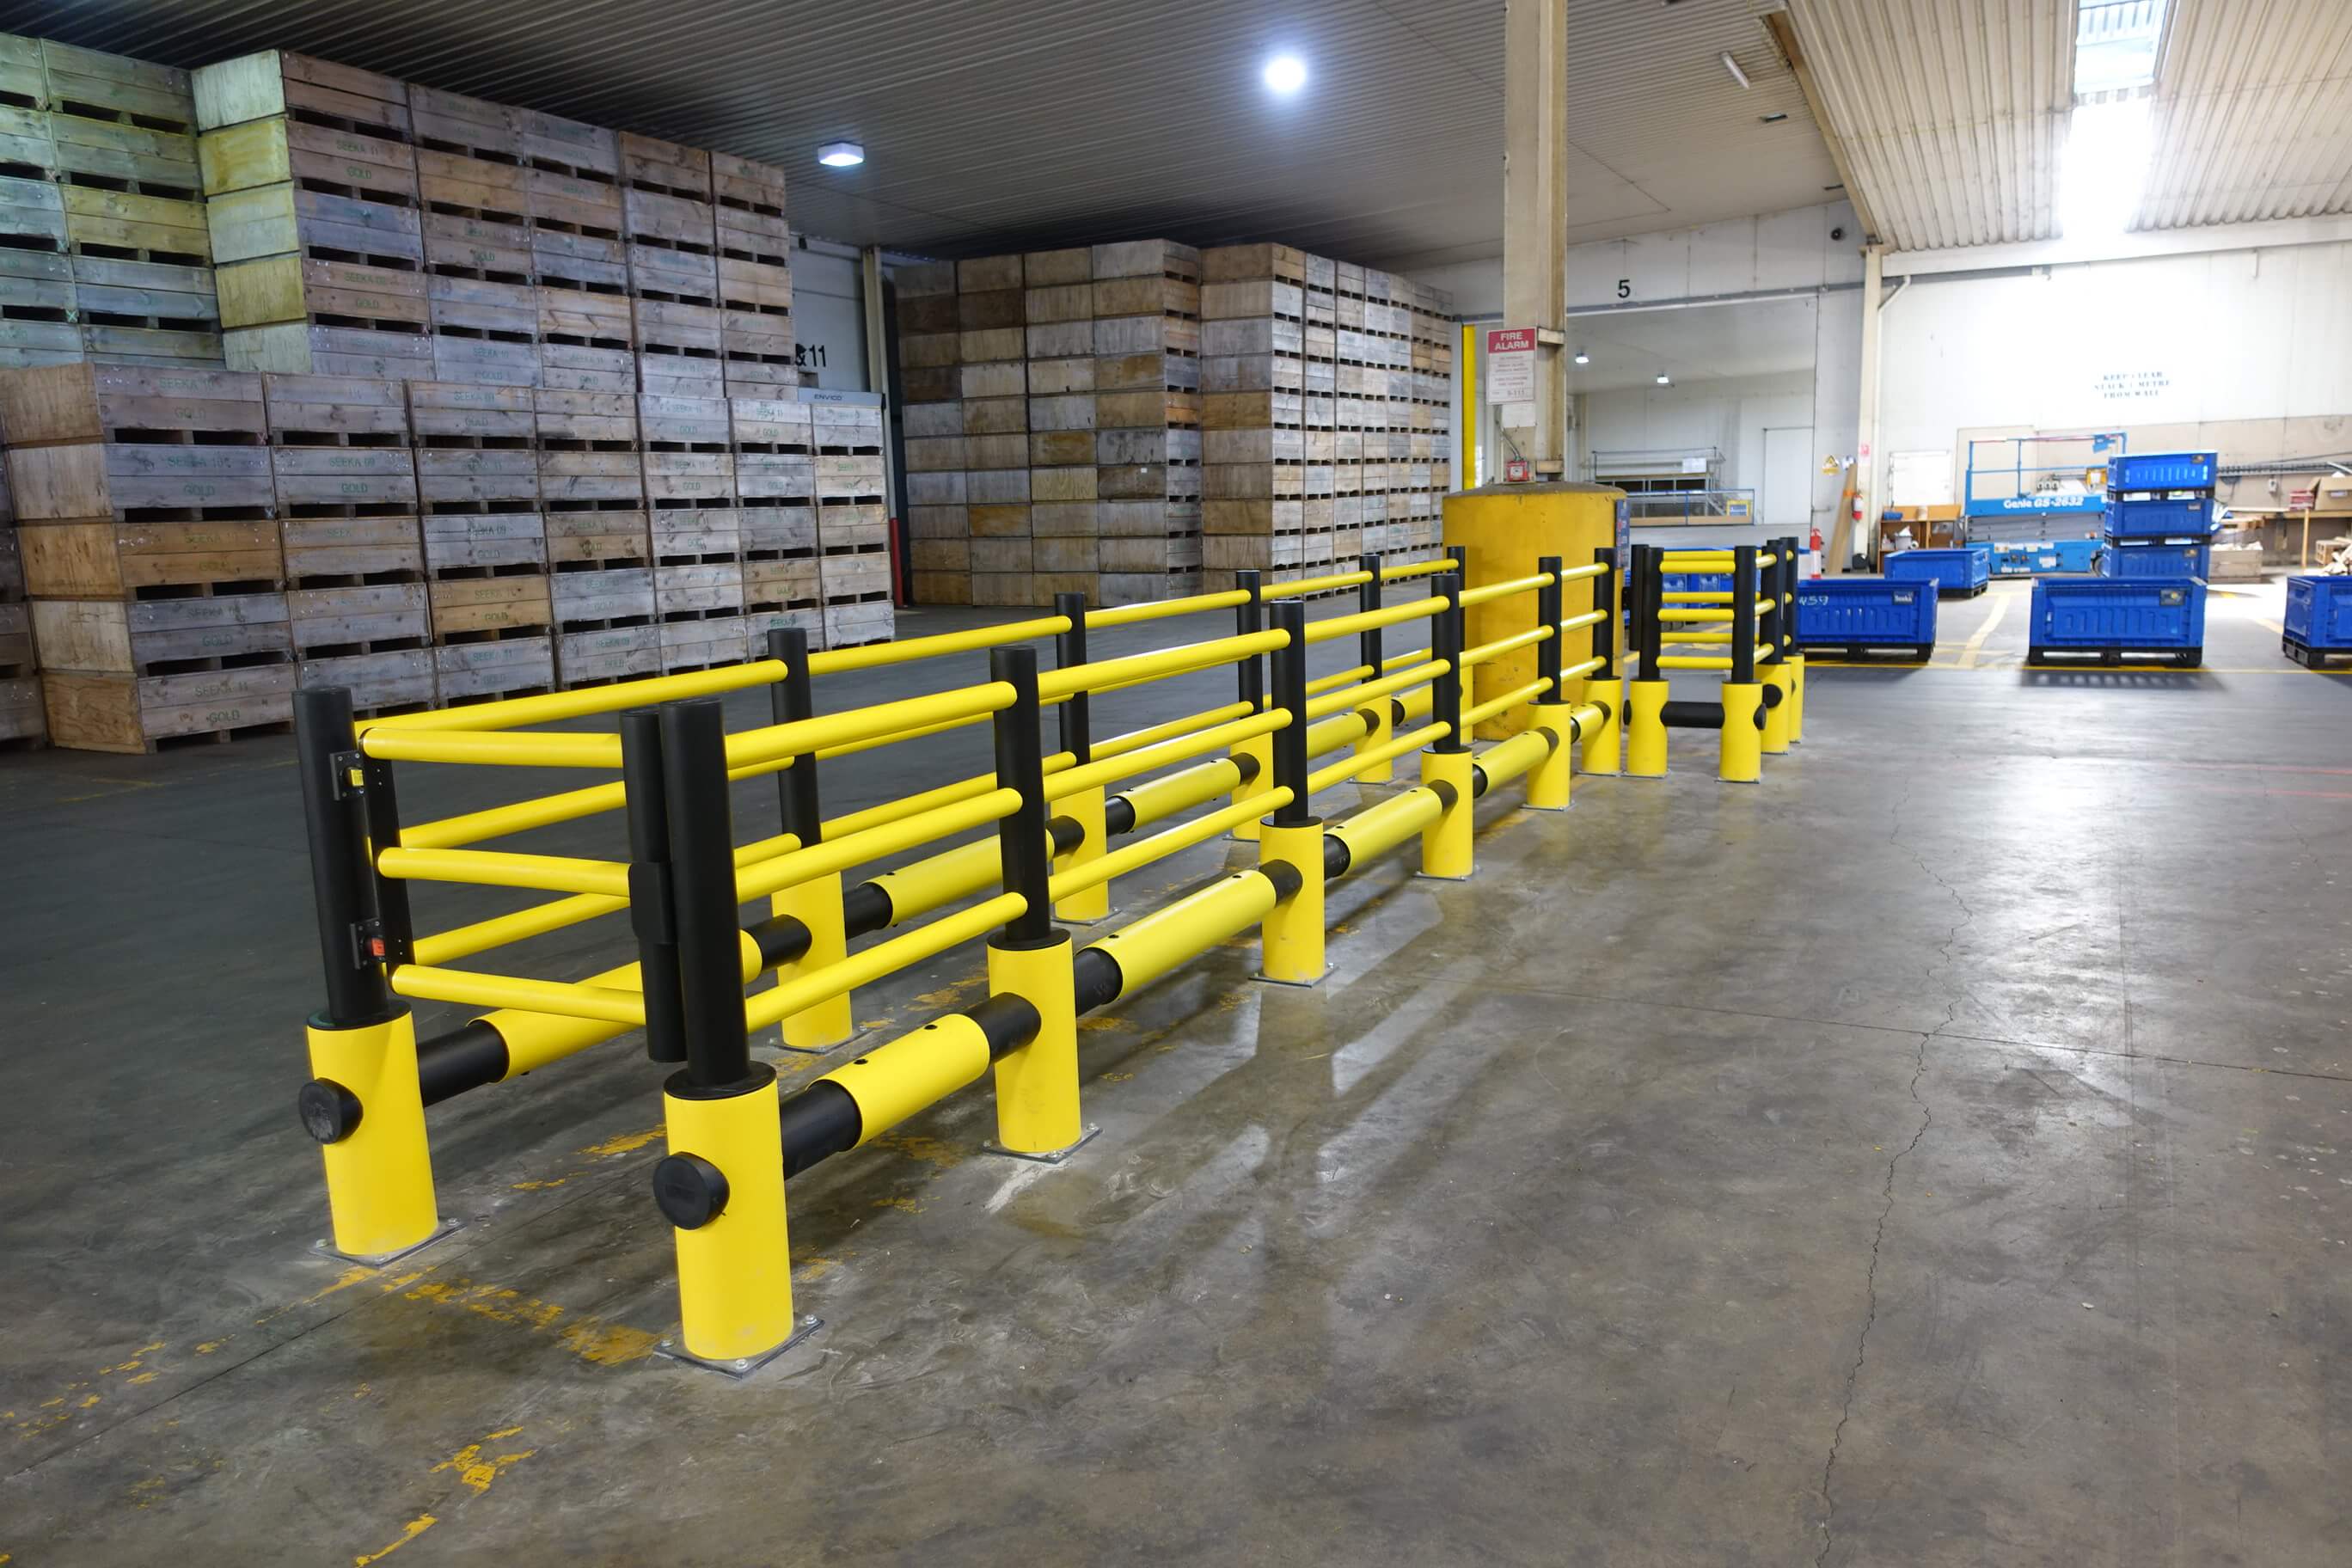 Warehouse safety tips 2021